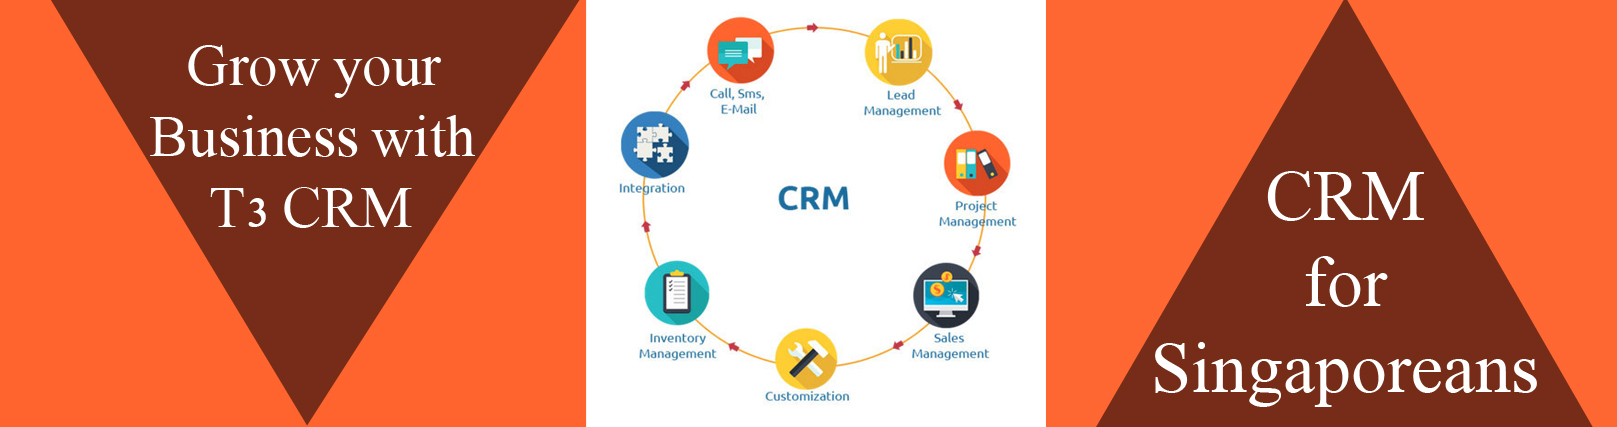 crm in singapore banner img 2